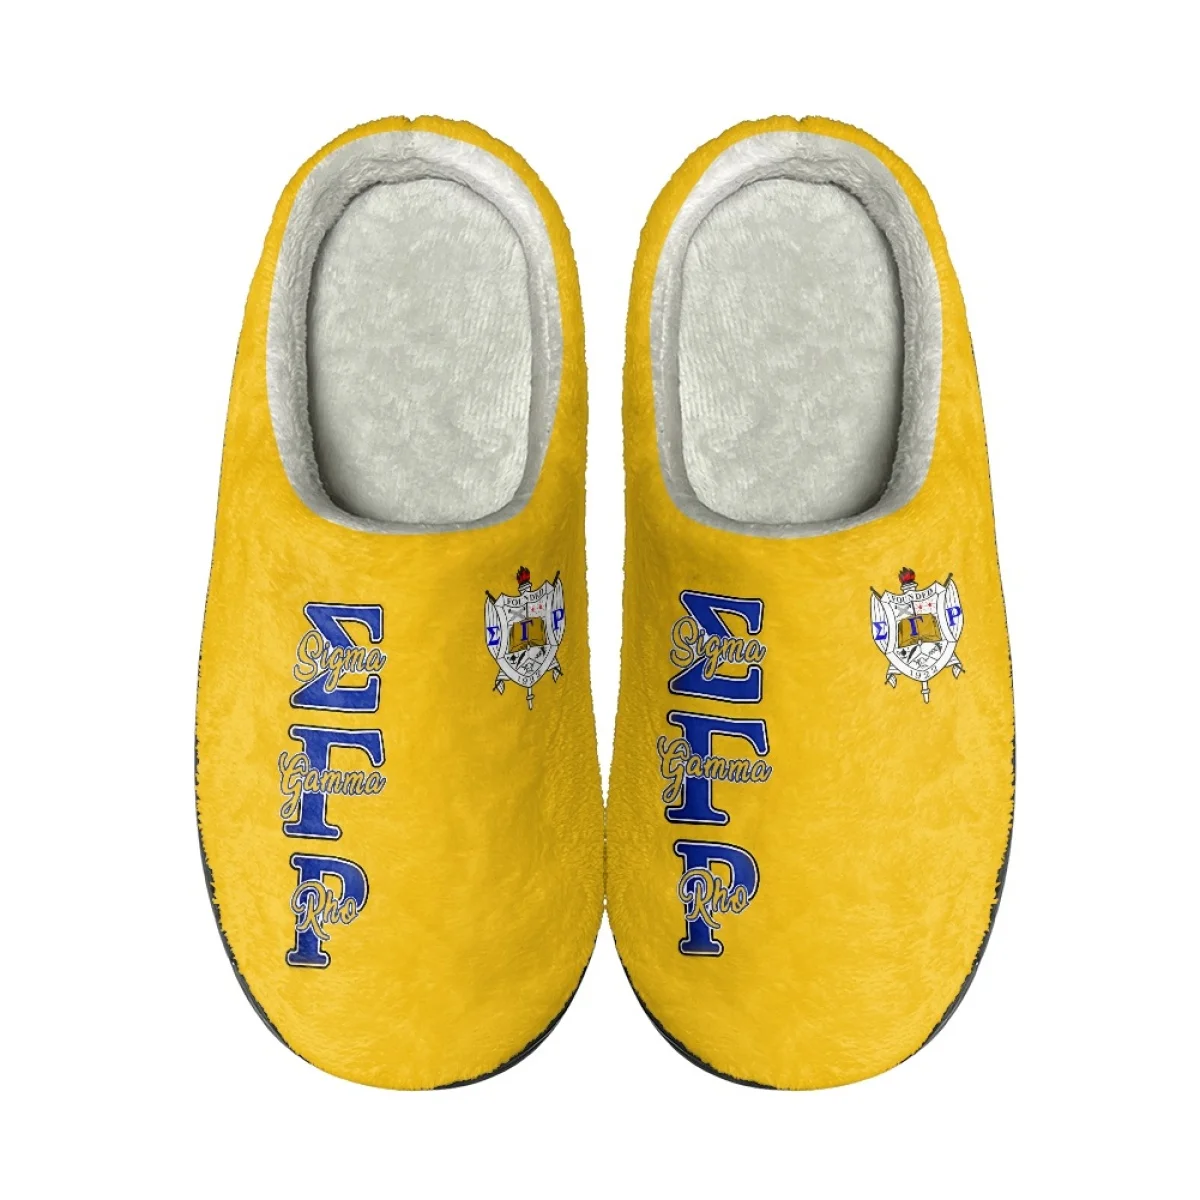 Man City FC **New for 2021** Official Merchandise Navy Moccasin Slippers  with Sherpa Fur Lining (UK 7/8, numeric_7): Amazon.co.uk: Fashion